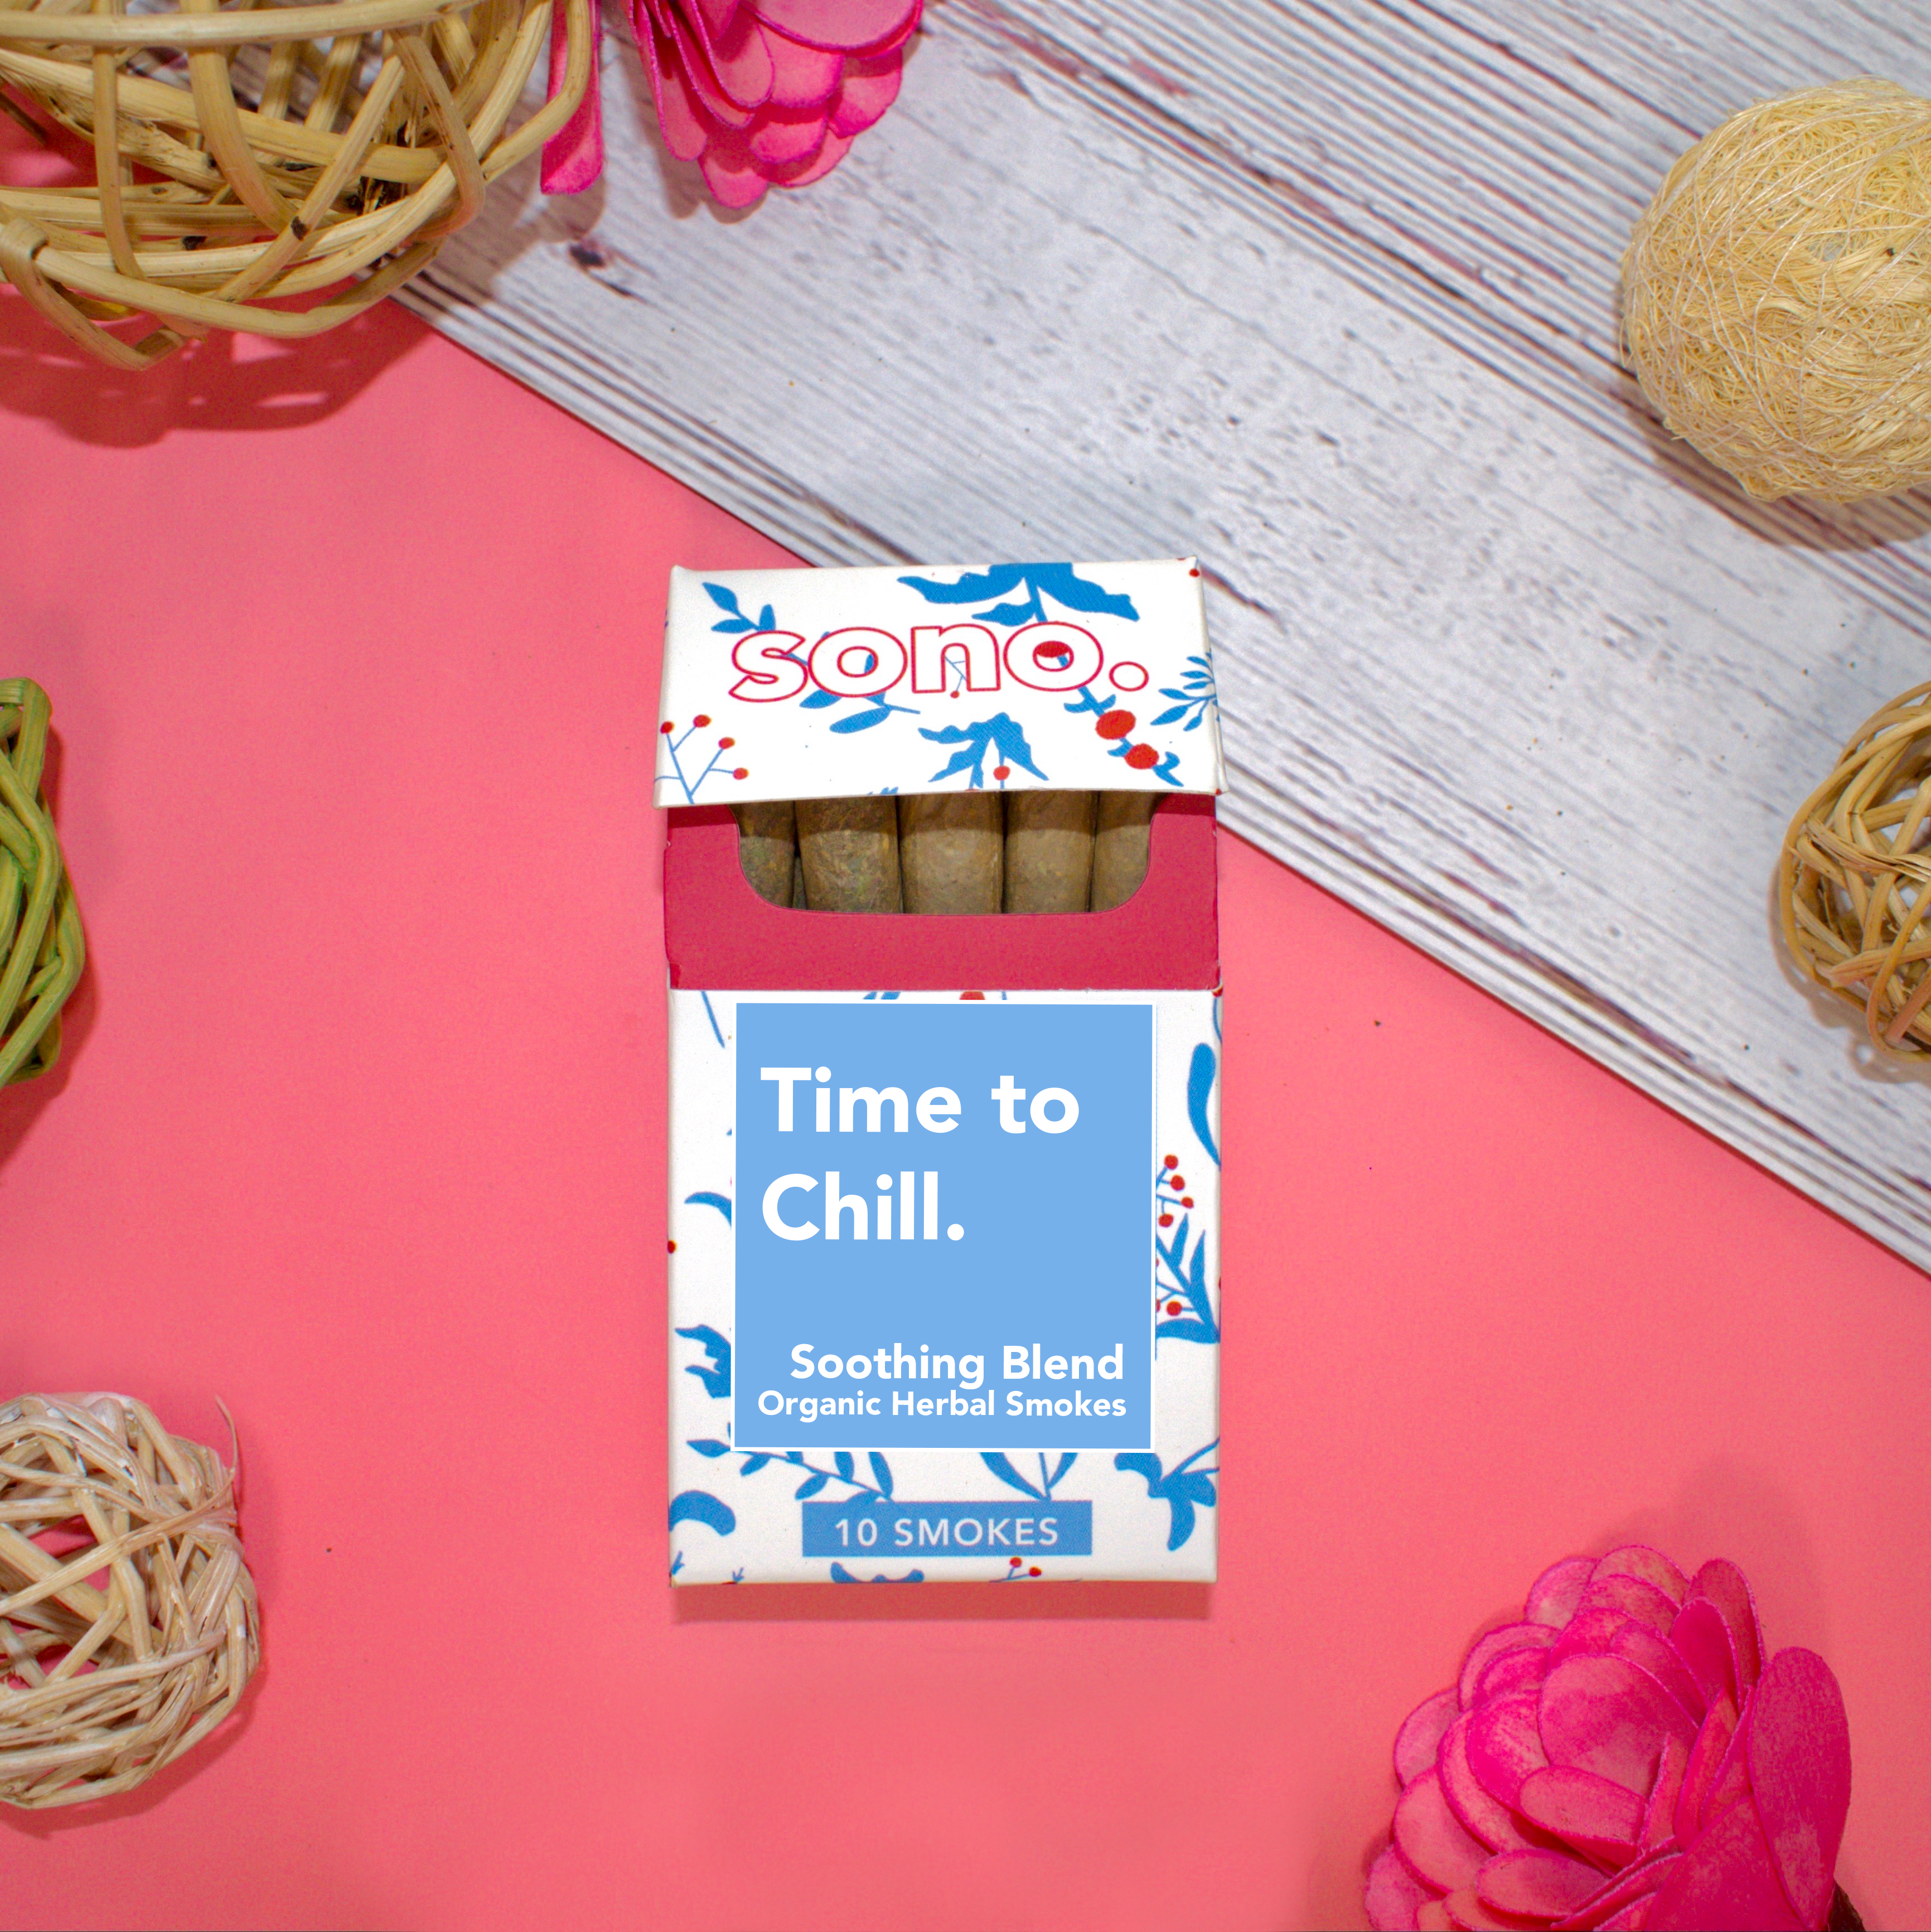 Image Description: A cardboard smoke pack titled Time to Chill, referring to the herbal smoking blend that the 10 smokes inside are filled with. Beneath the title are the words Soothing Blends, & Organic Herbal Smokes. The box is decorated with blue floral shapes designed to look like the ingredients inside: Marigold, Klip Dagga, Rosemary, Mullein, Skullcap & Lavender. Peeking out from the pack are 10 herbal prerolls, also known as Herbal Spliffs, Herbal Cigarettes, Herbs & Flowers Prerolls, or Herb Tokes.